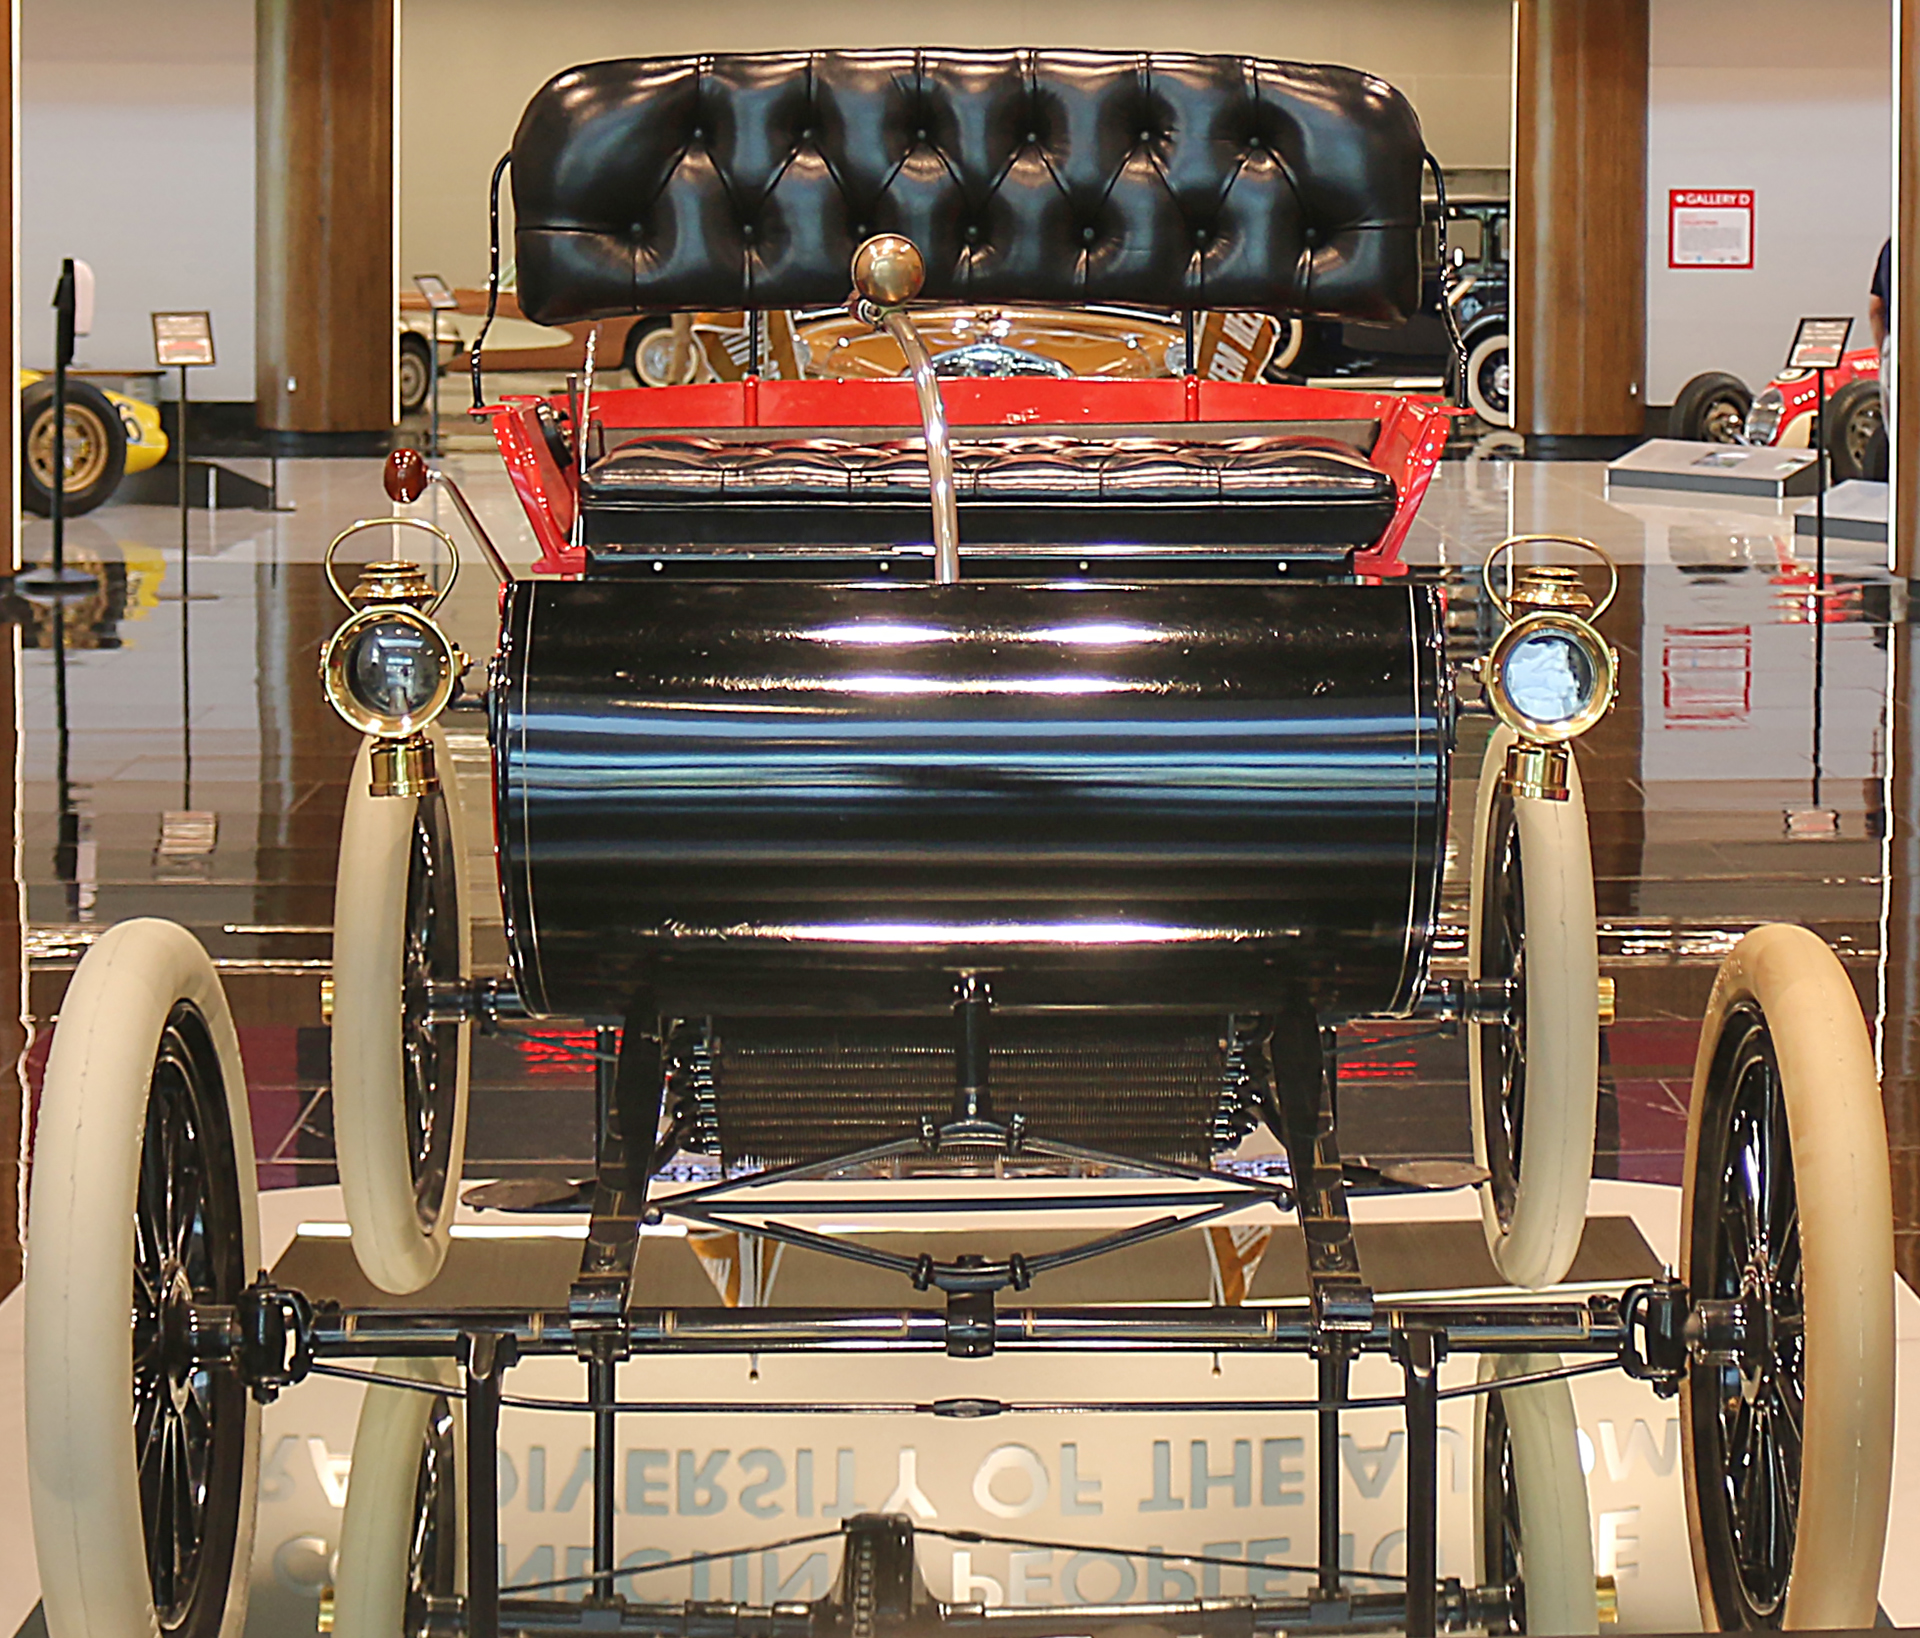 1903 Oldsmobile Curved Dash Runabout